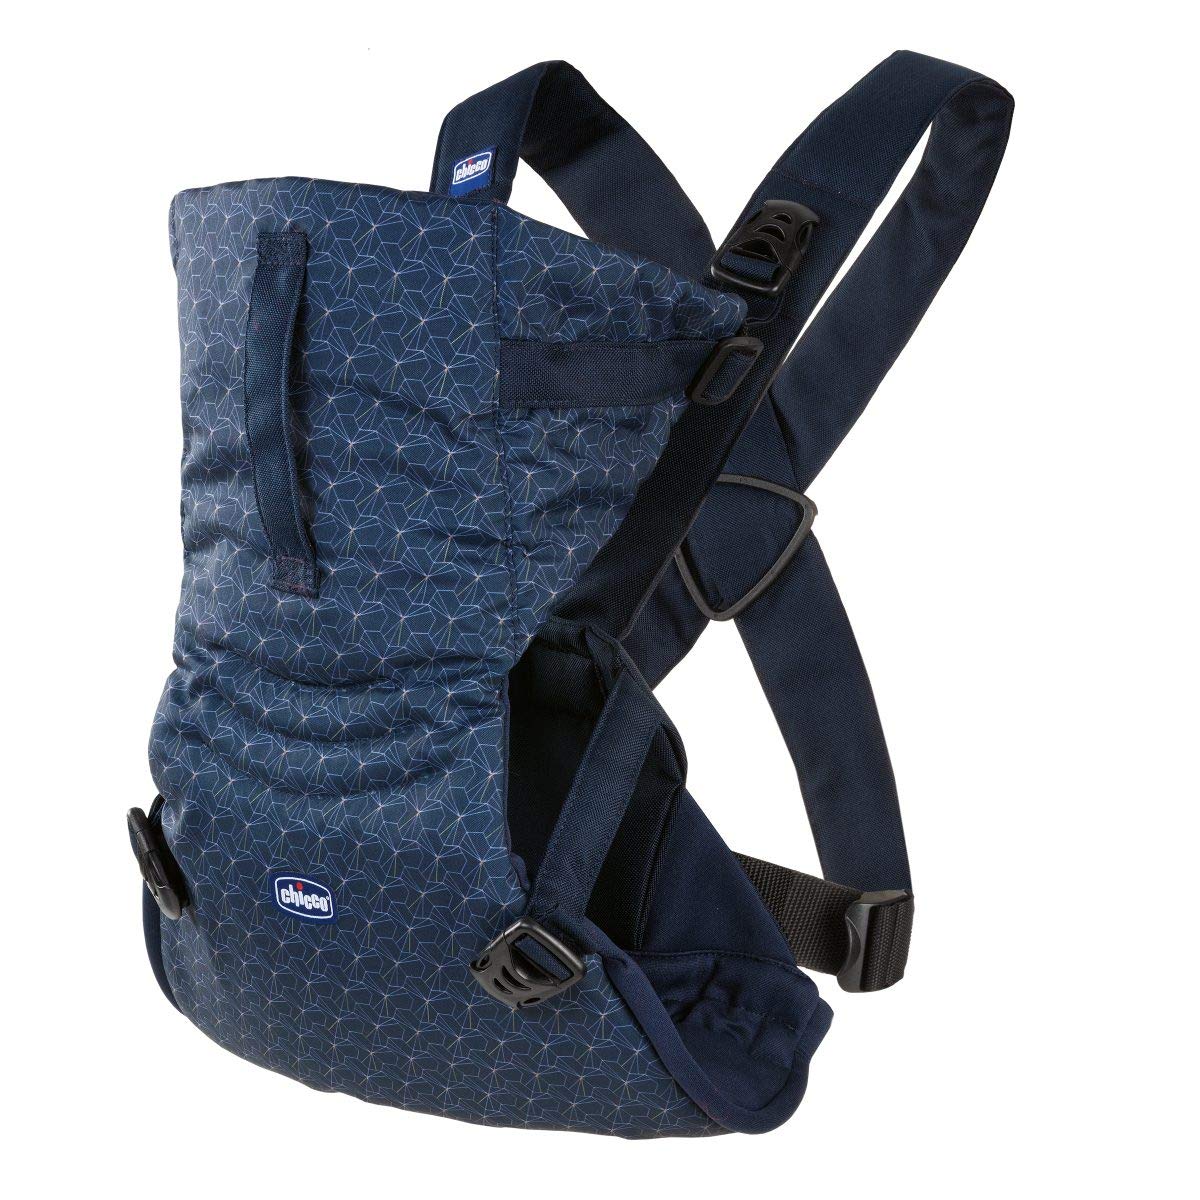 Chicco Easy FIT Baby Carrier